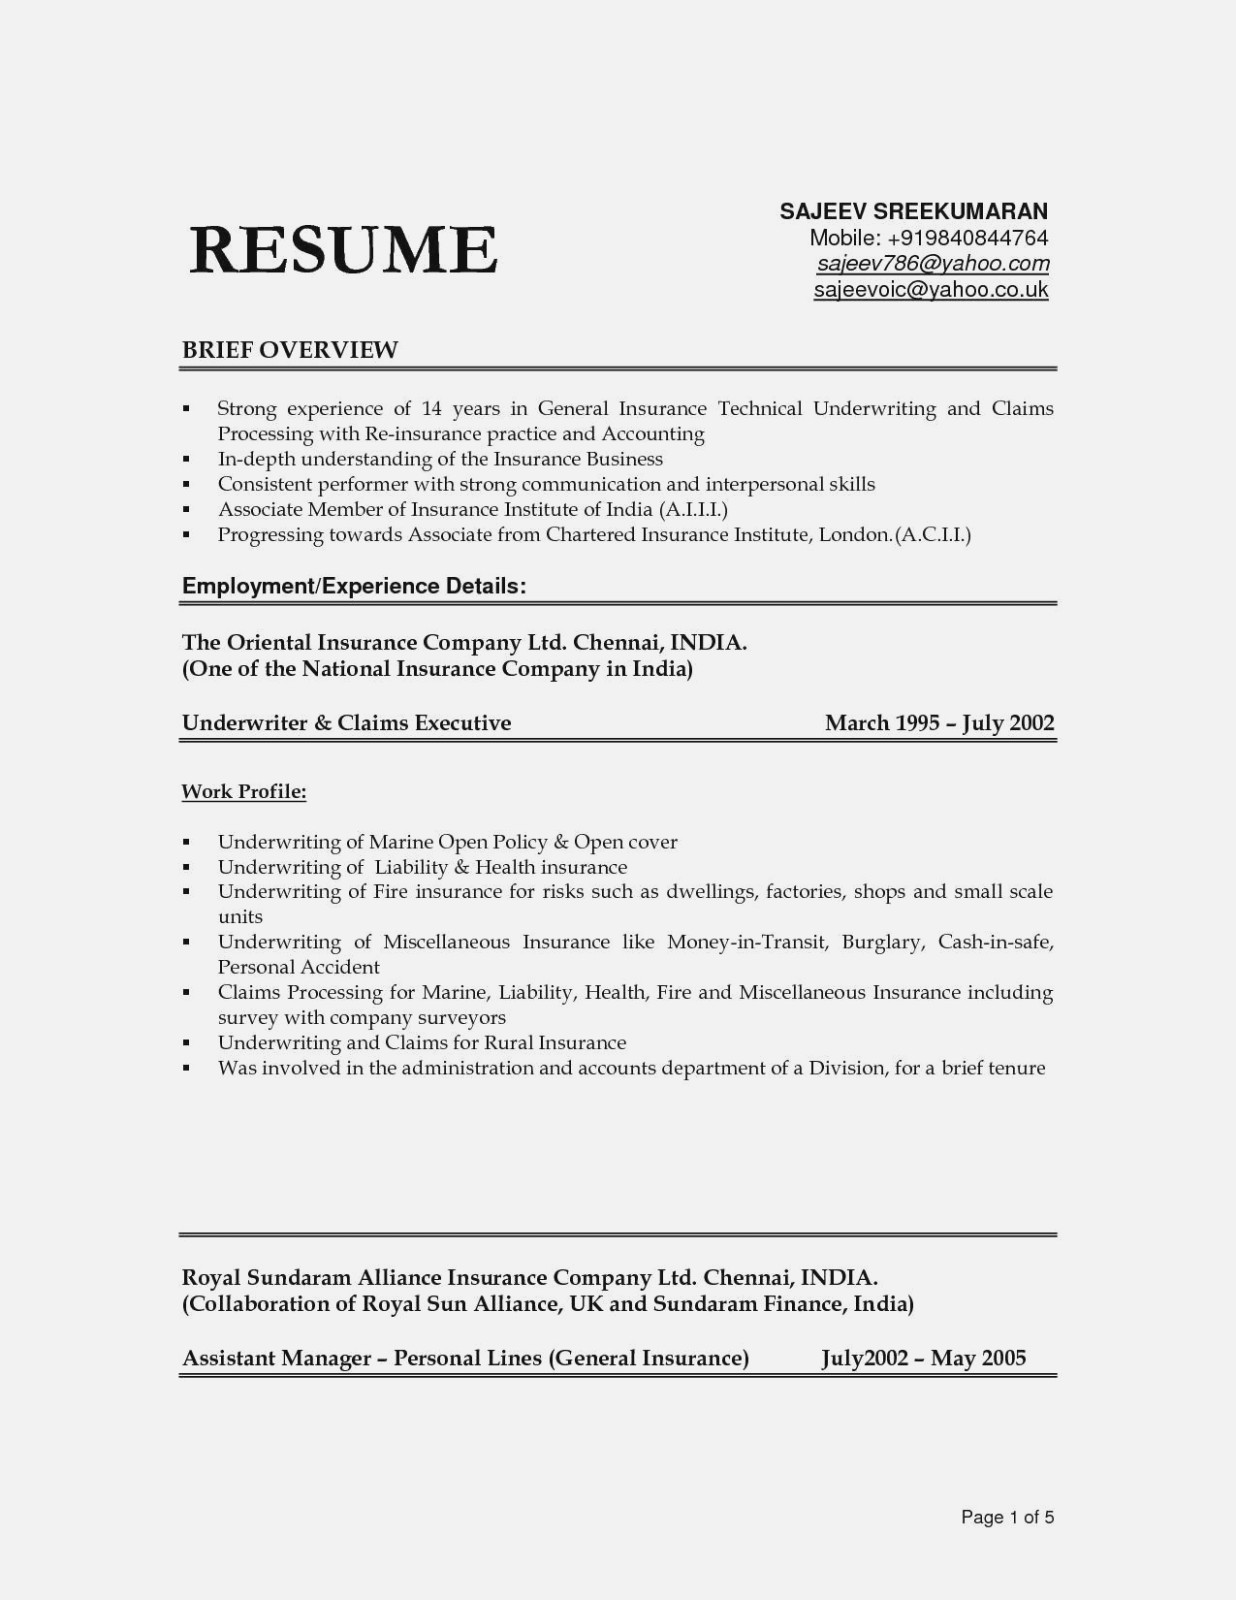 Sample Resume for Domestic Helper Abroad Domestic Helper Resume Sample Best Resume Examples